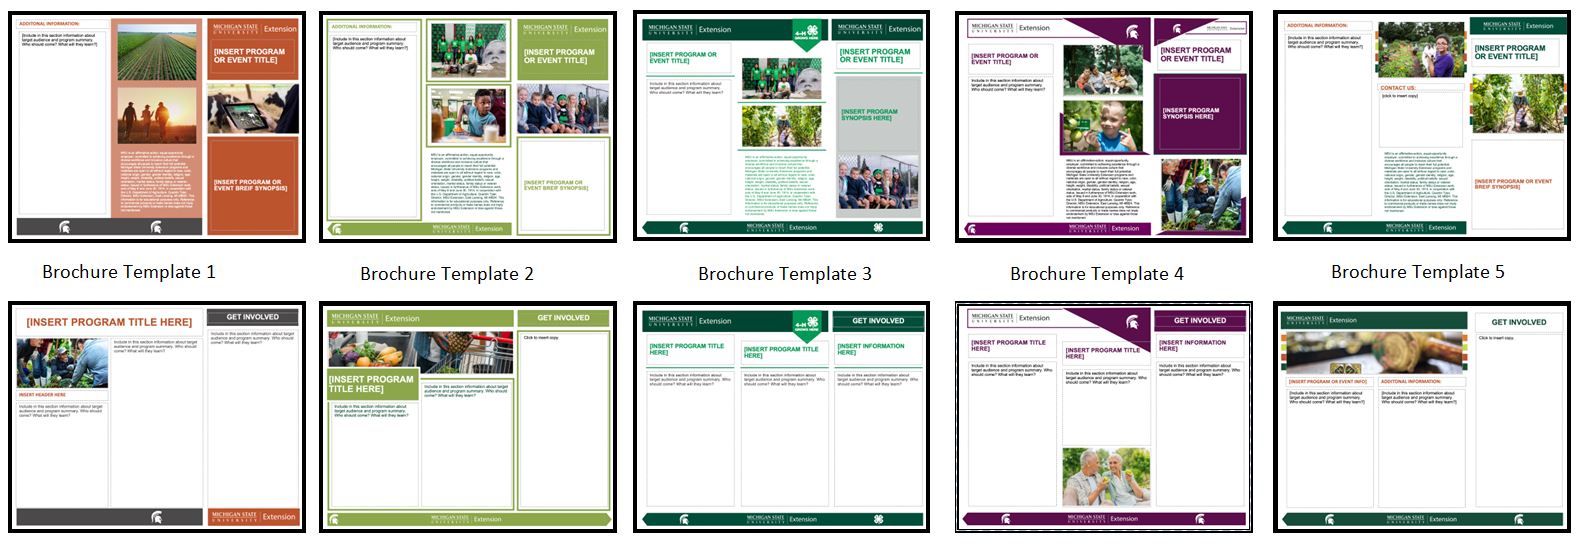 Thumbnails of all 5 brochure template options